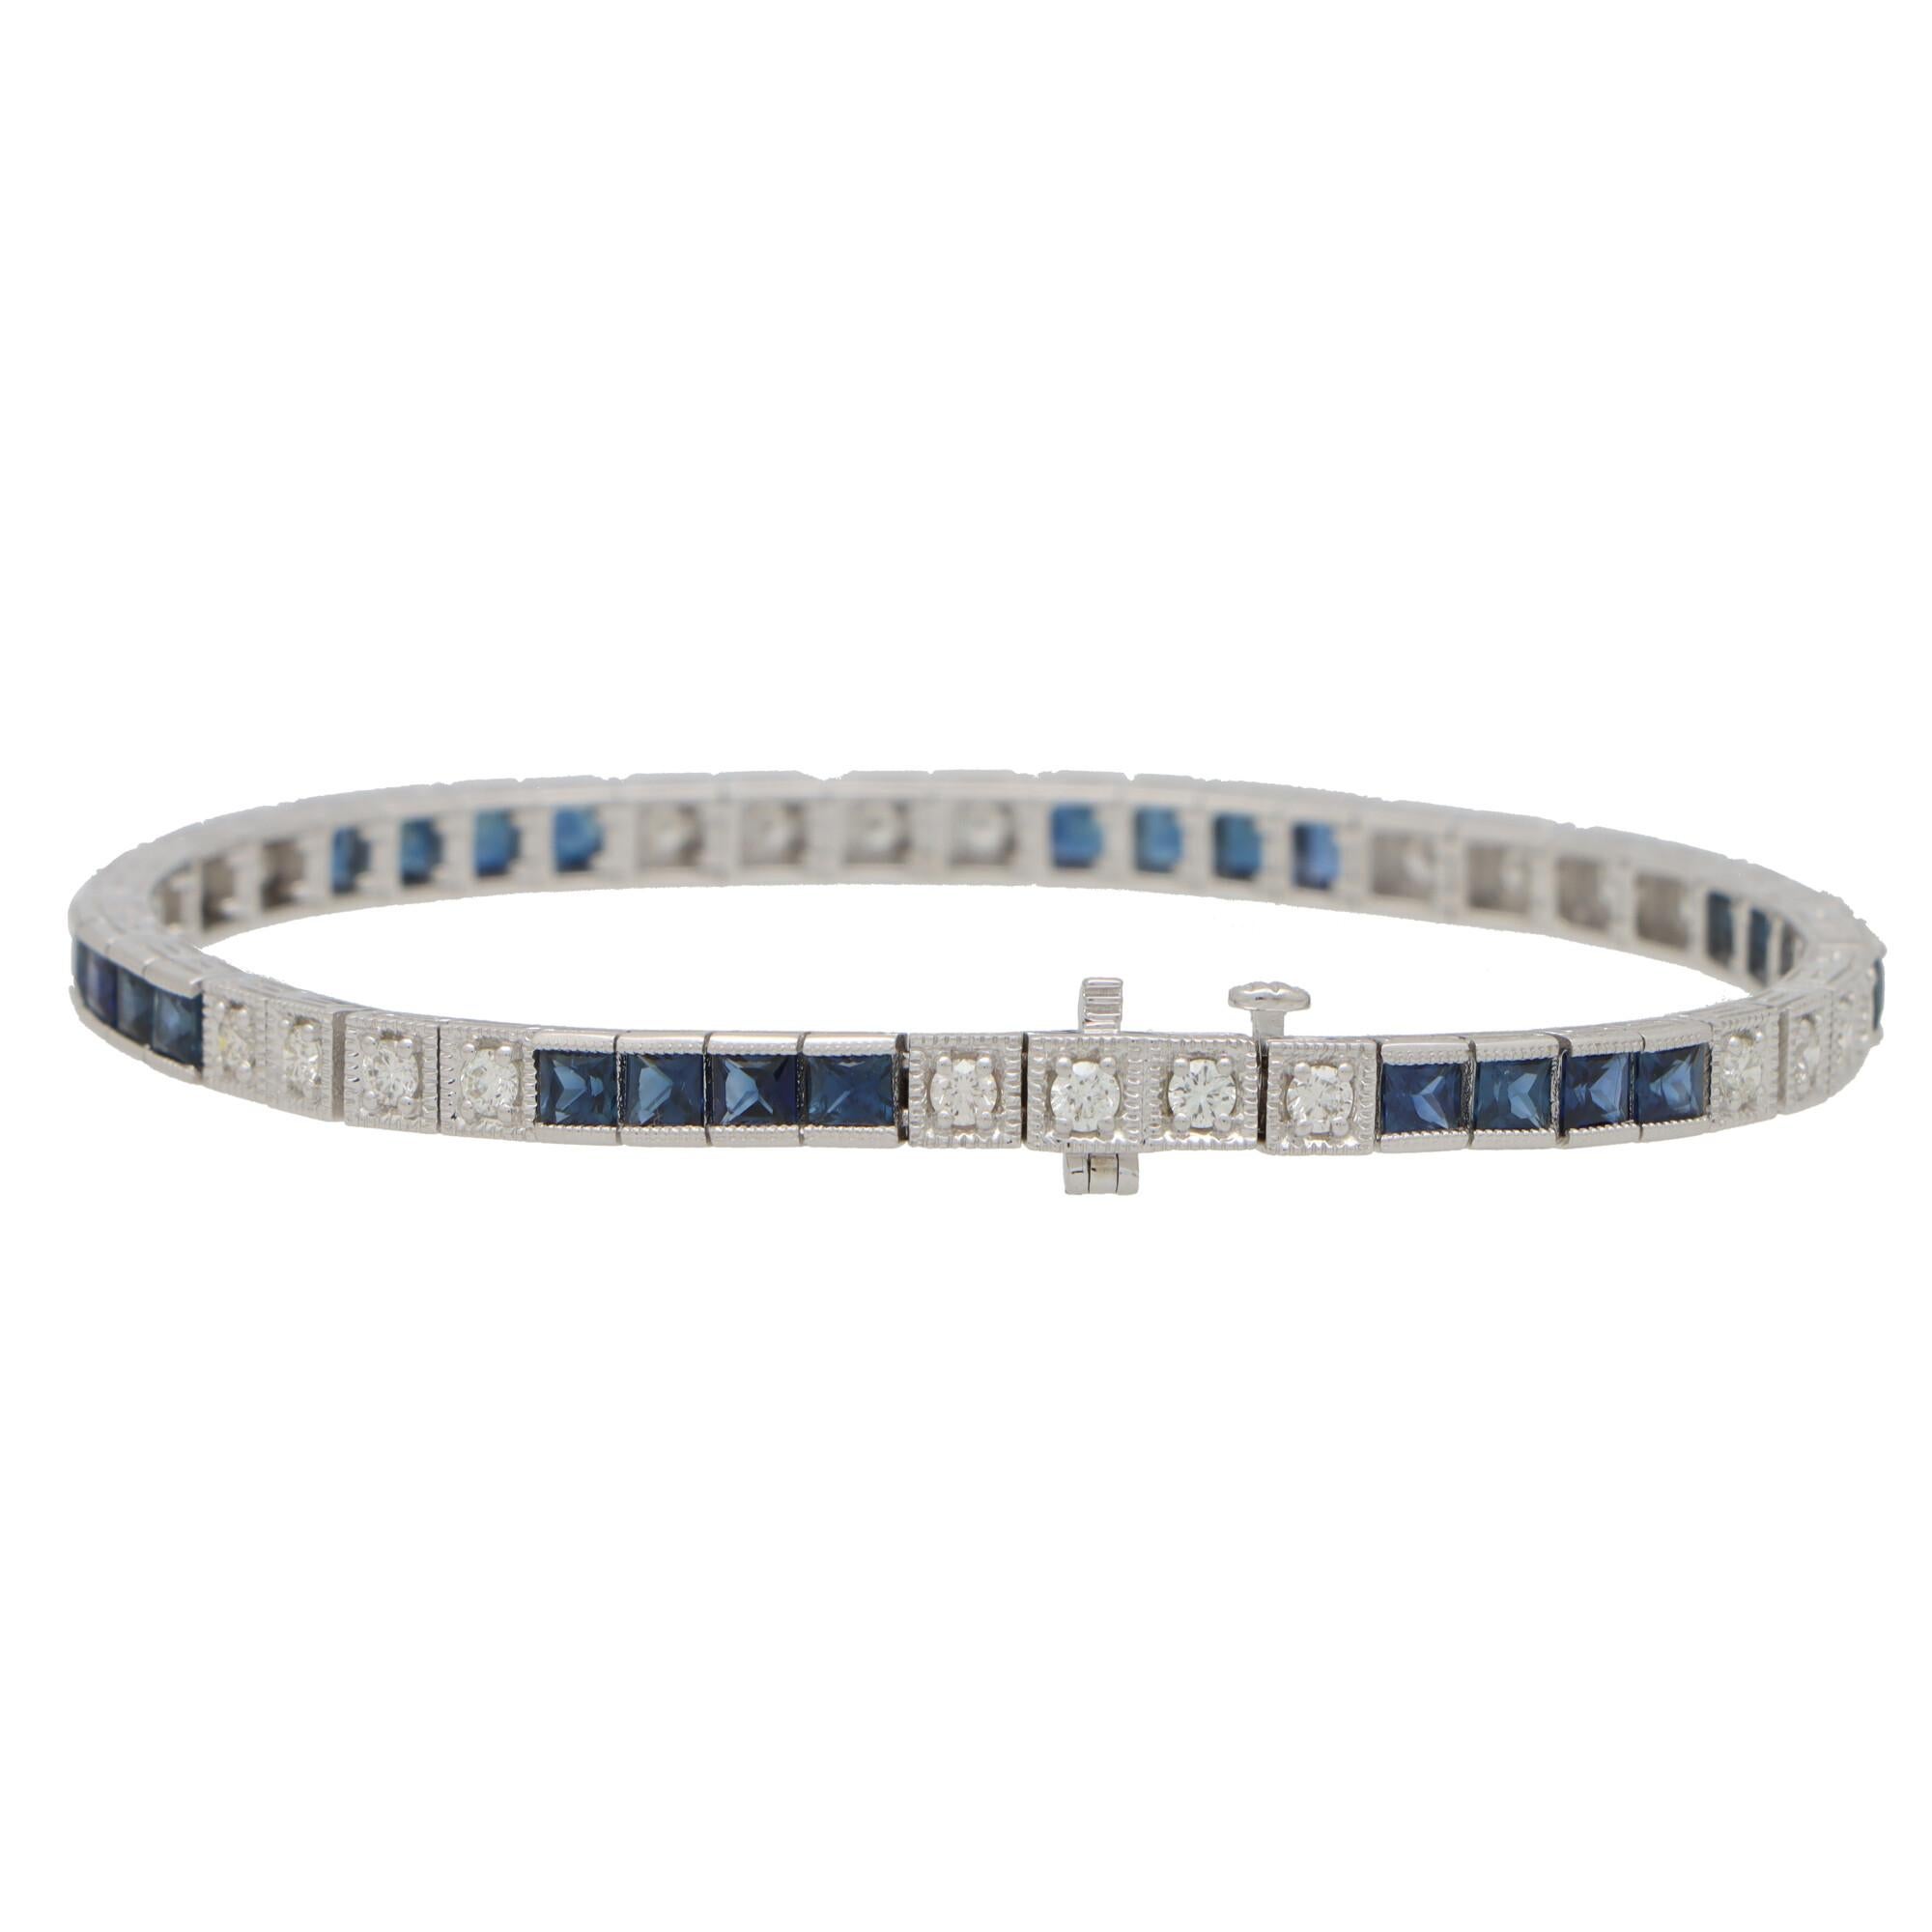 A beautiful contemporary diamond and sapphire line bracelet set in 18k white gold.

The bracelet is composed of a grand total of 24 round brilliant cut diamonds and 24 square cut vibrant sapphire stones. All of the stones are securely pressure and